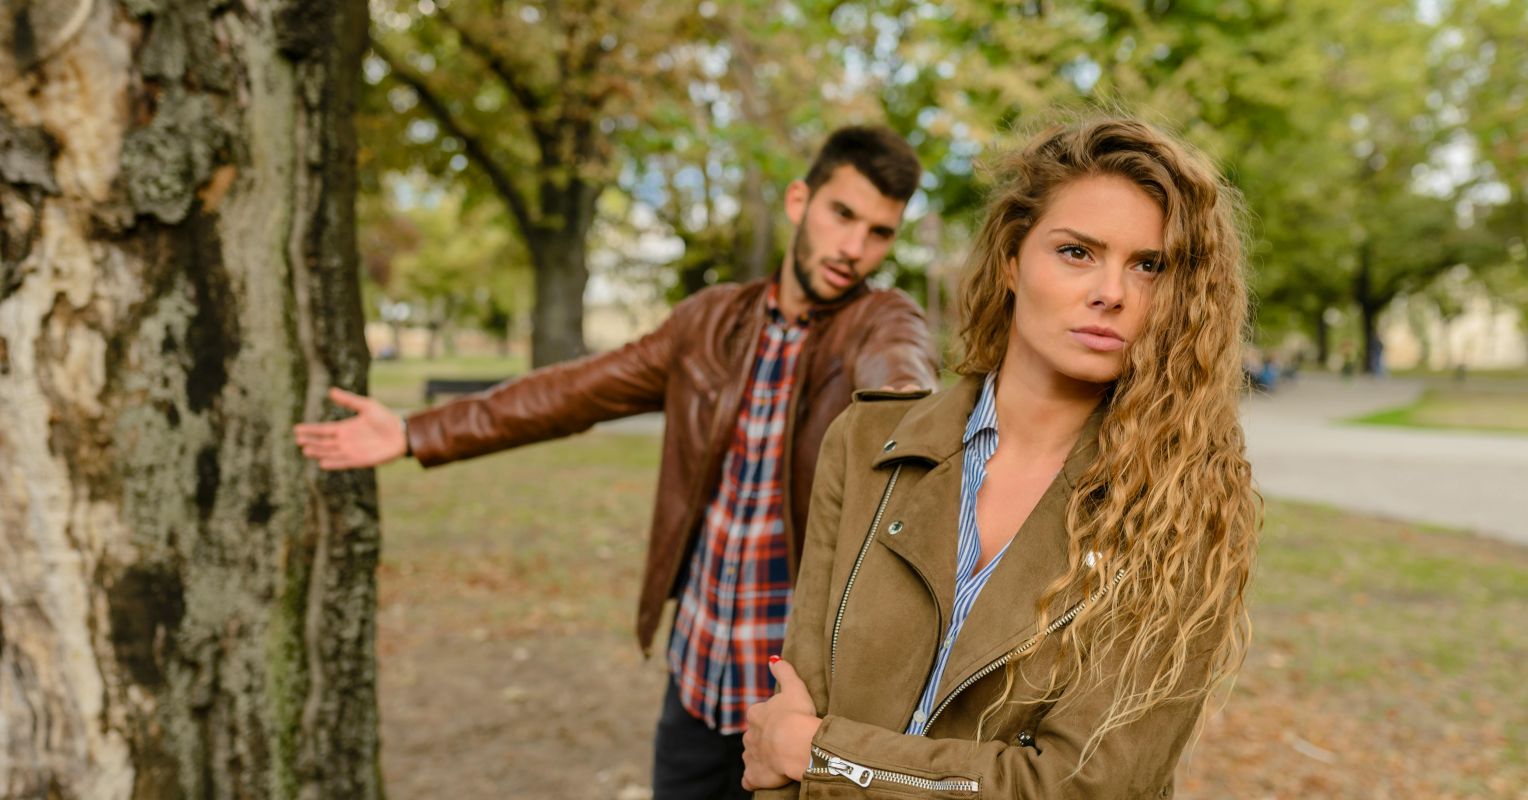 Cheated On? Here Are the 5 Worst Things You Can Do